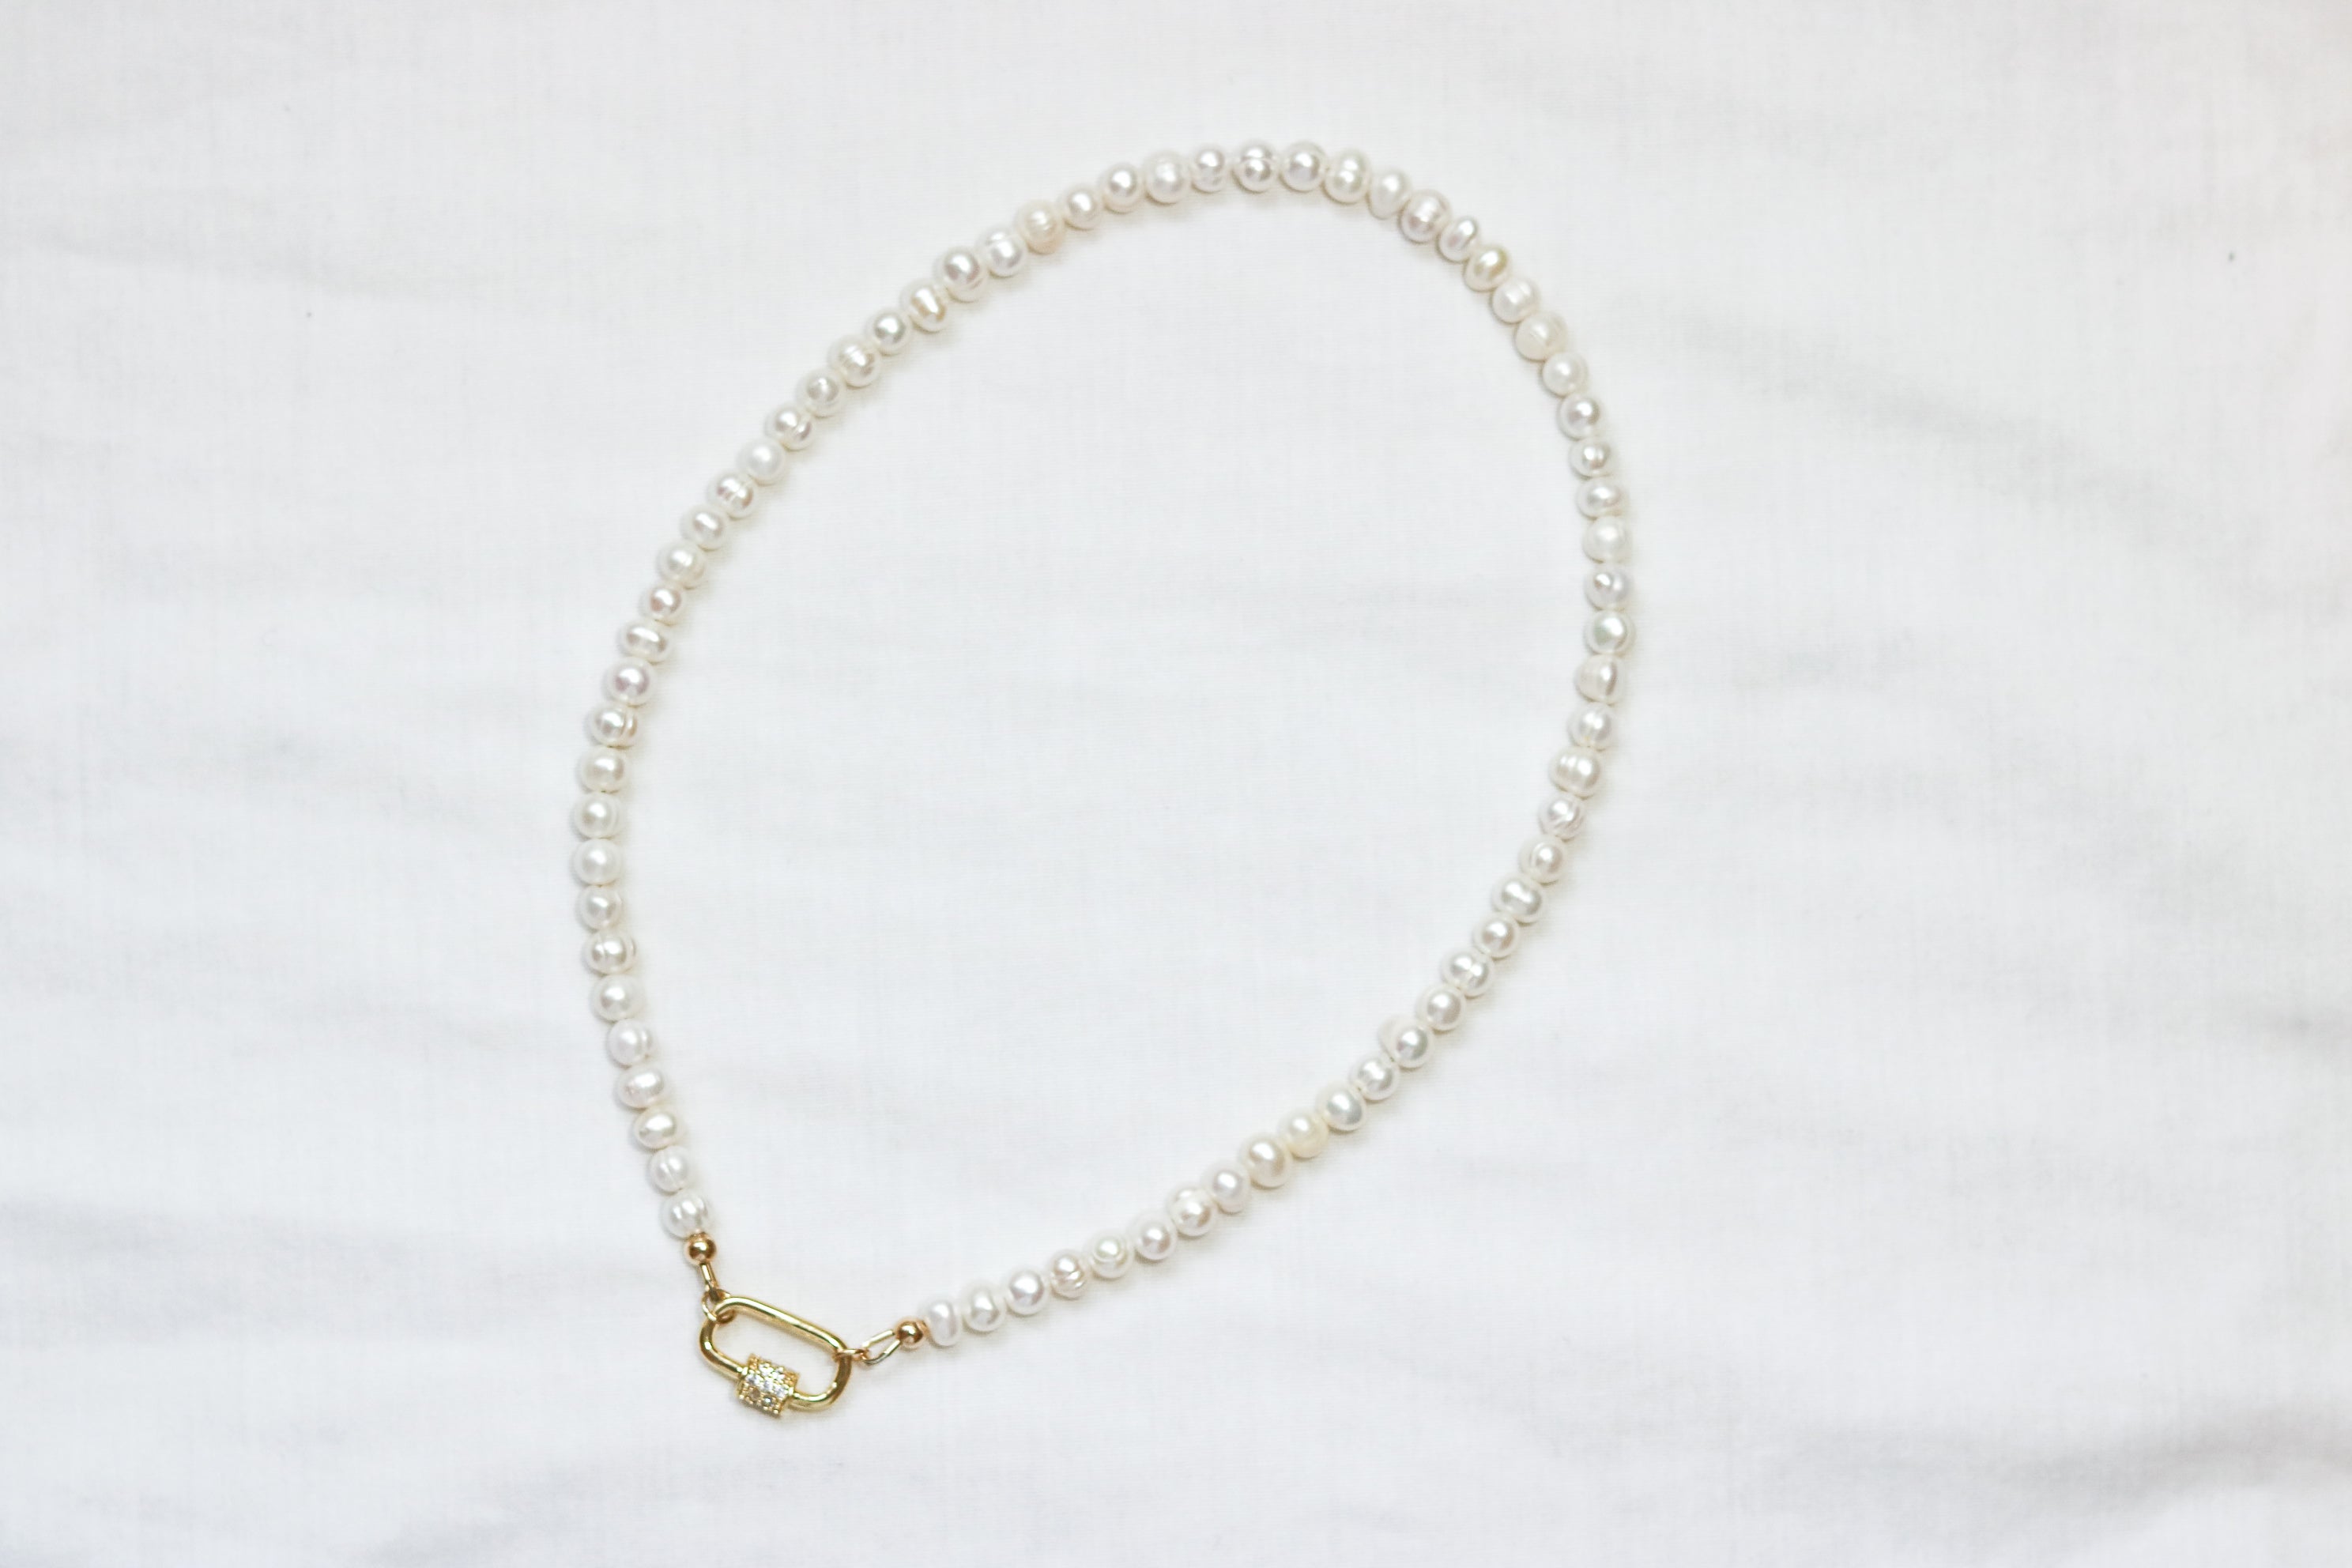 Pearl Carabiner Necklace